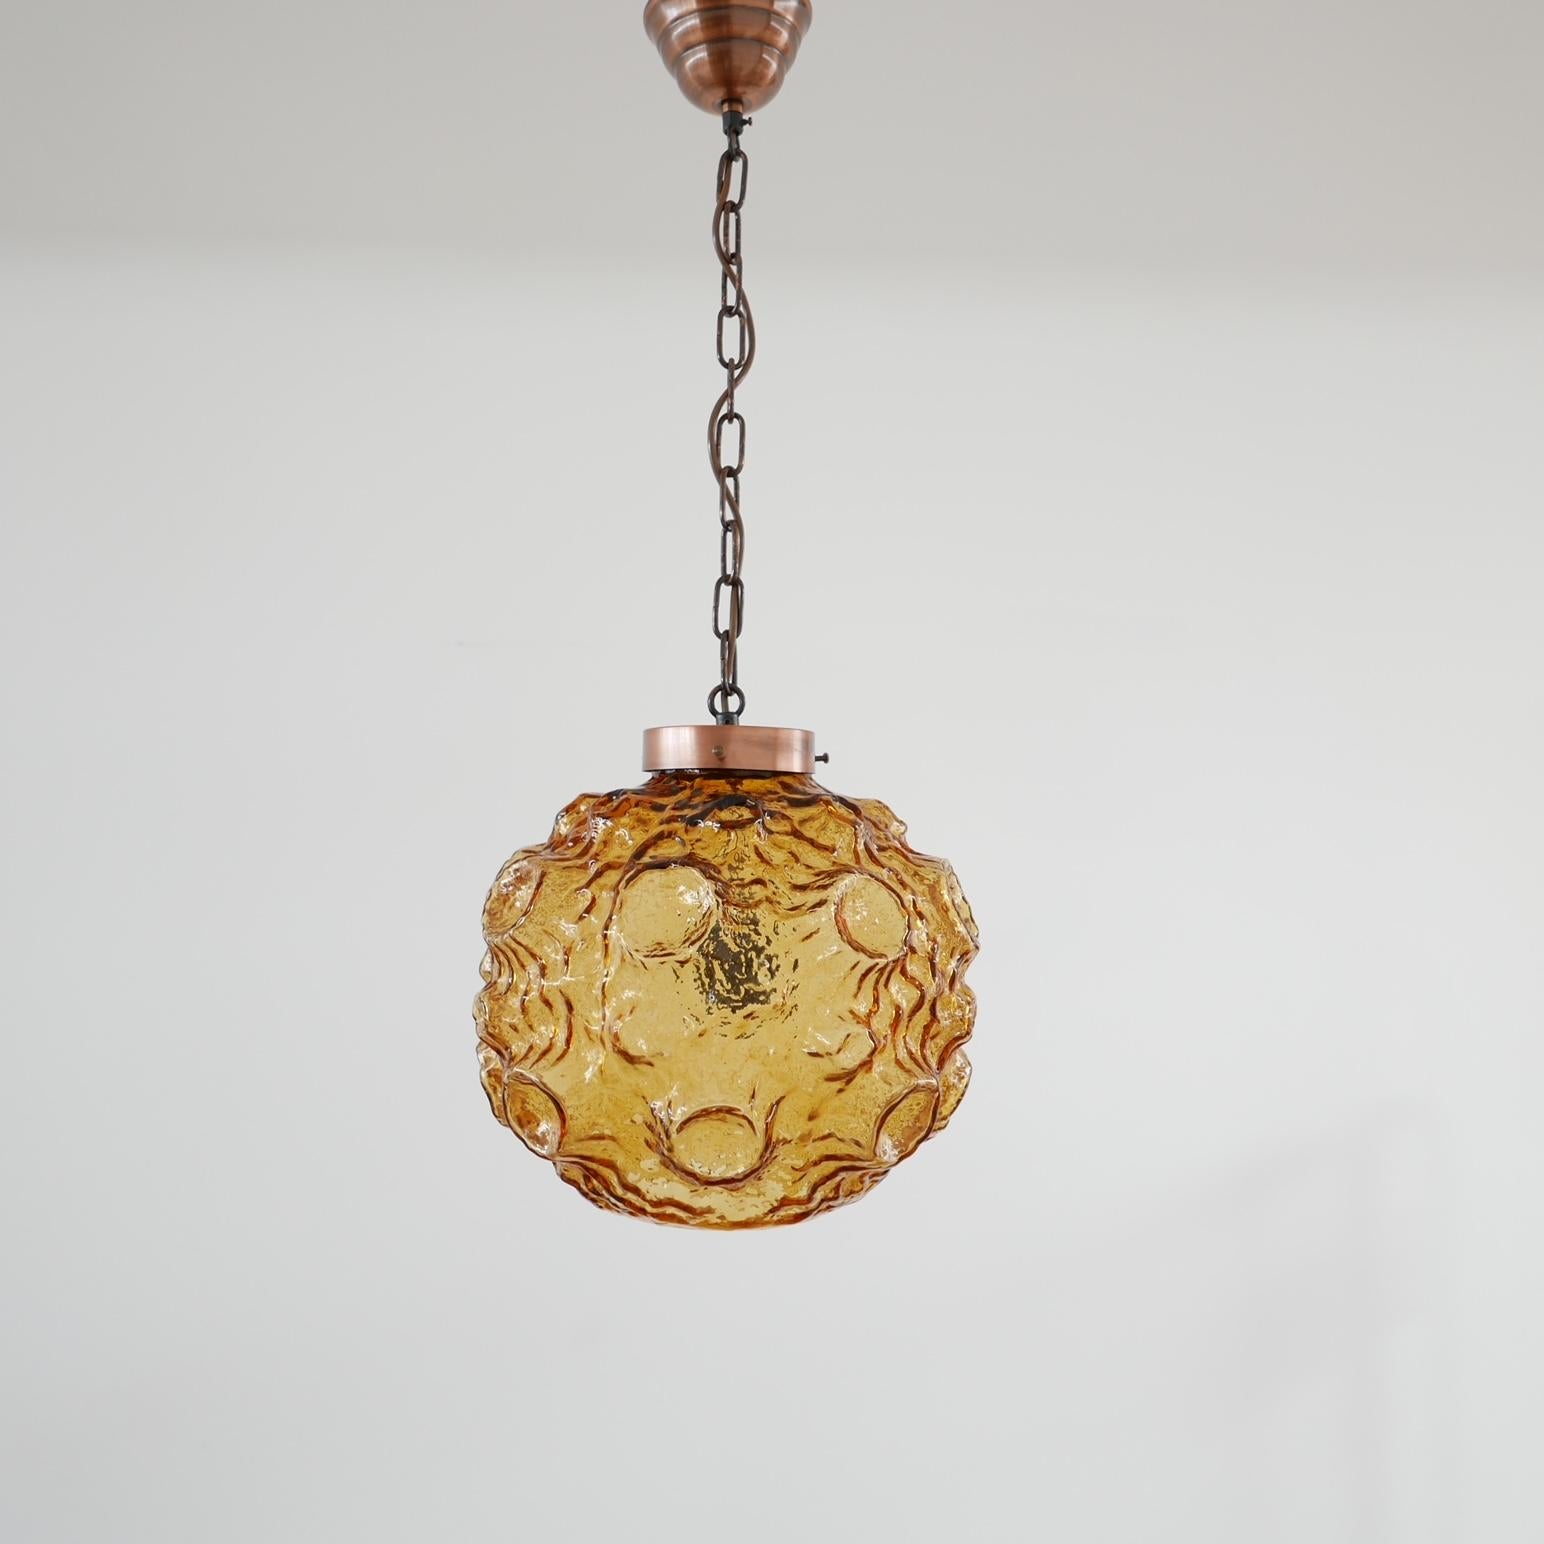 Danish Mid-Century Copper and Glass Pendant Light In Good Condition For Sale In London, GB